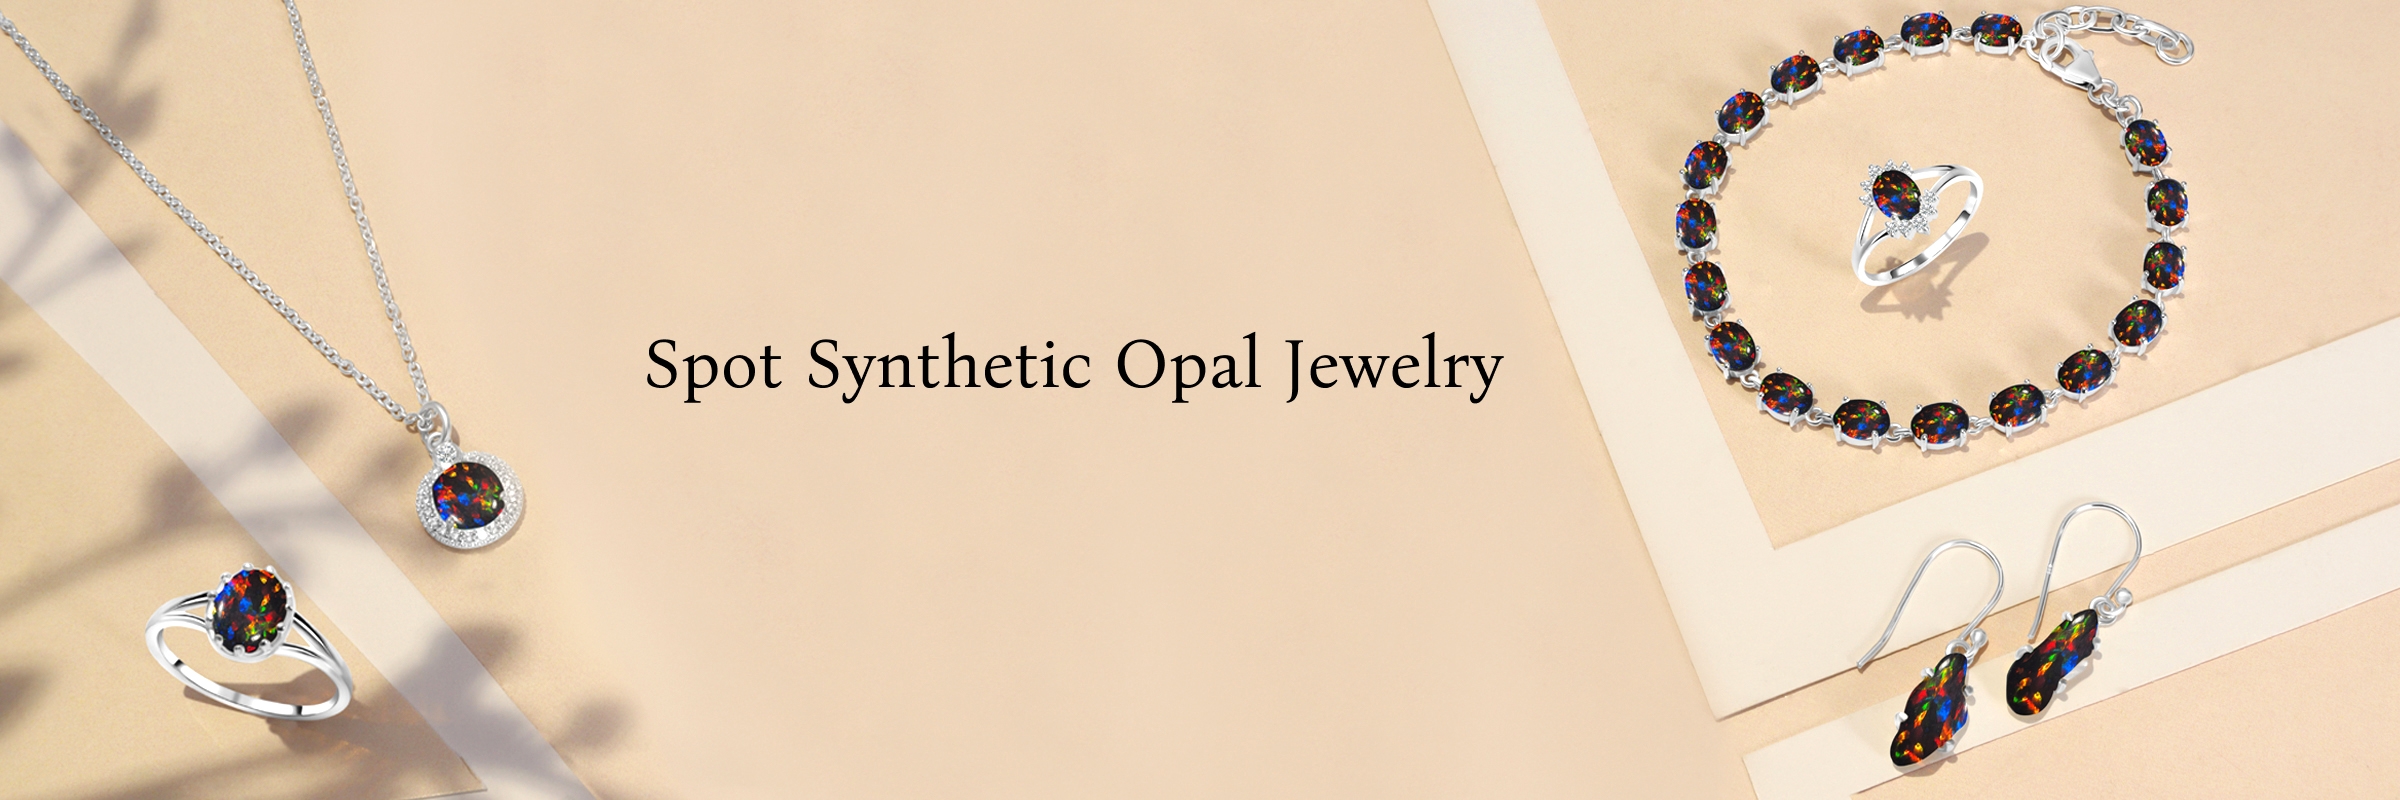 How To Identify Synthetic Opal Gemstone Real or Fake?